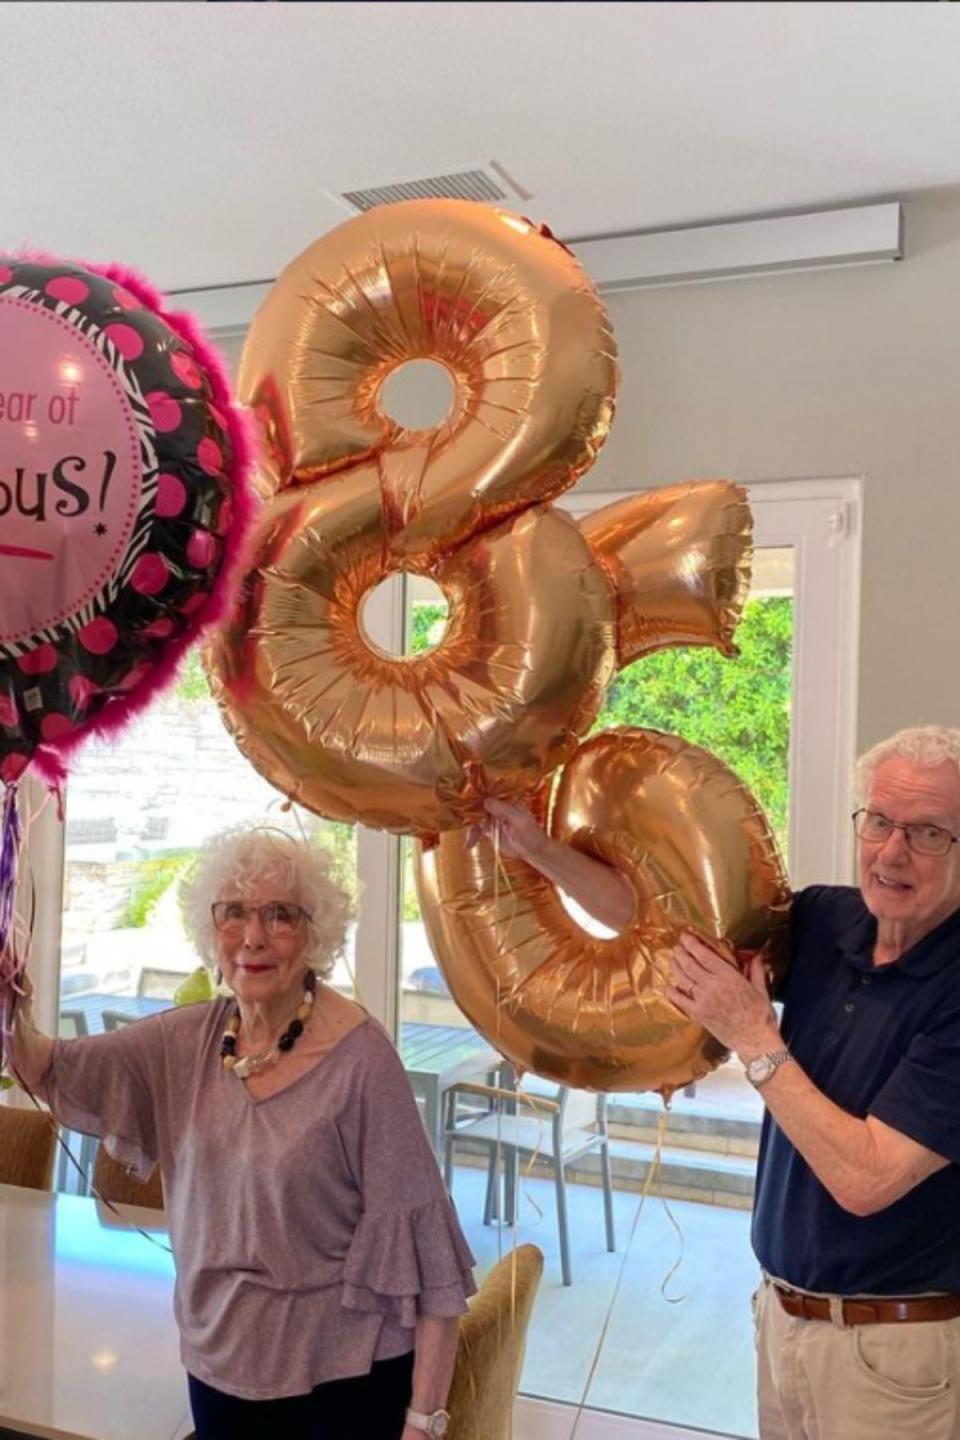 The actor celebrated Marion’s  86th birthday alongside his father when they stayed with him during lockdown in 2020 (John Barrowman/instagram)